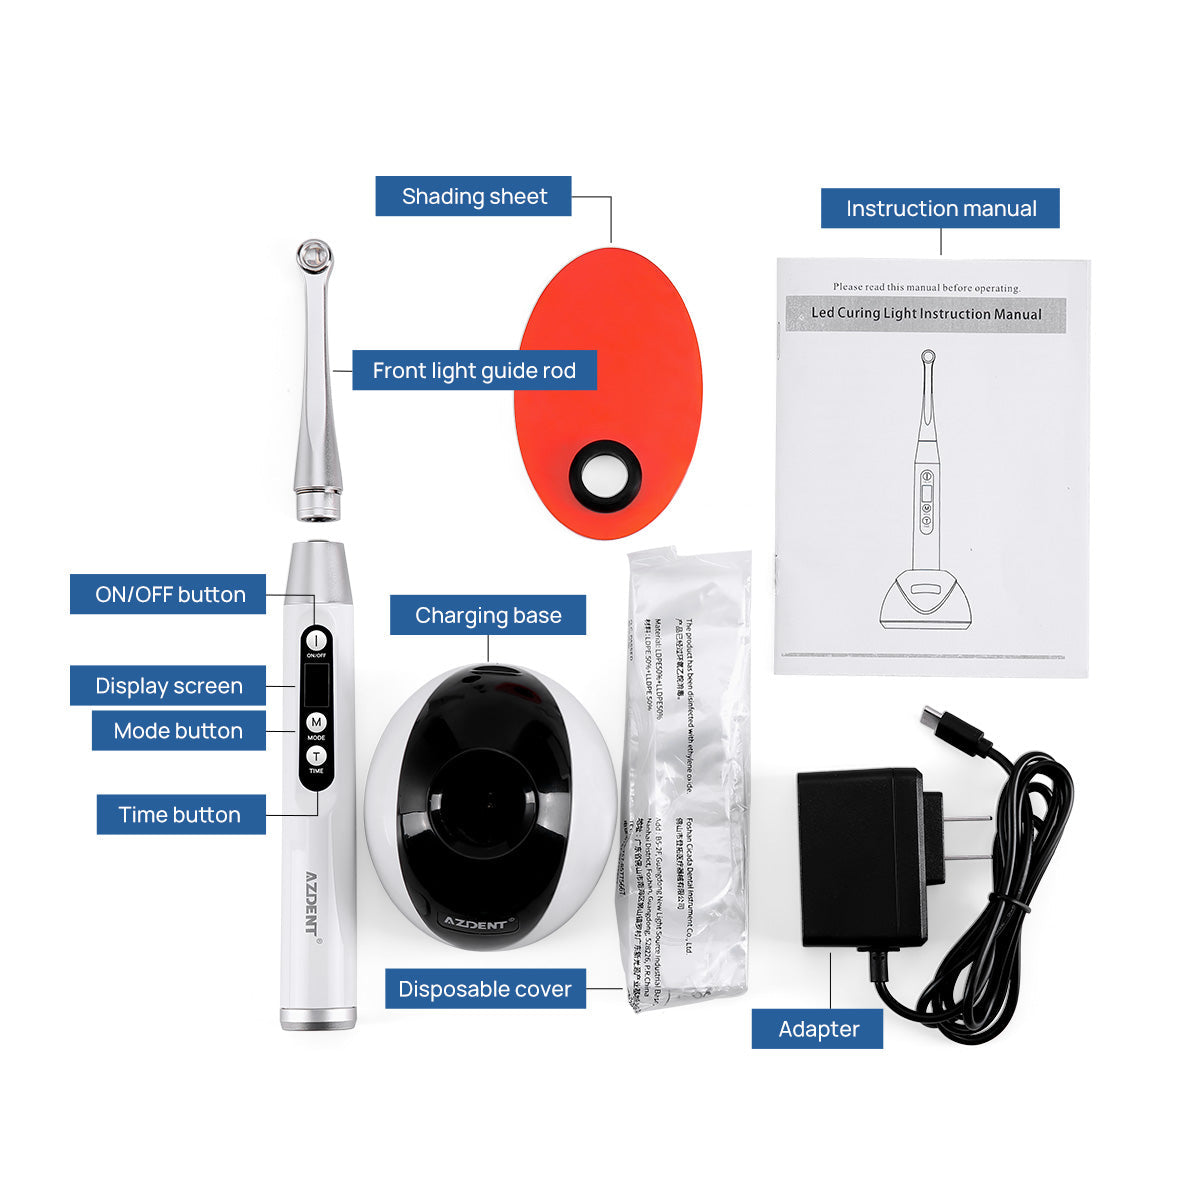 PAIRAY Dental LED Curing Light Wireless 2200mW/cm² 1 Sec Curing 3 Modes - pairaydental.com